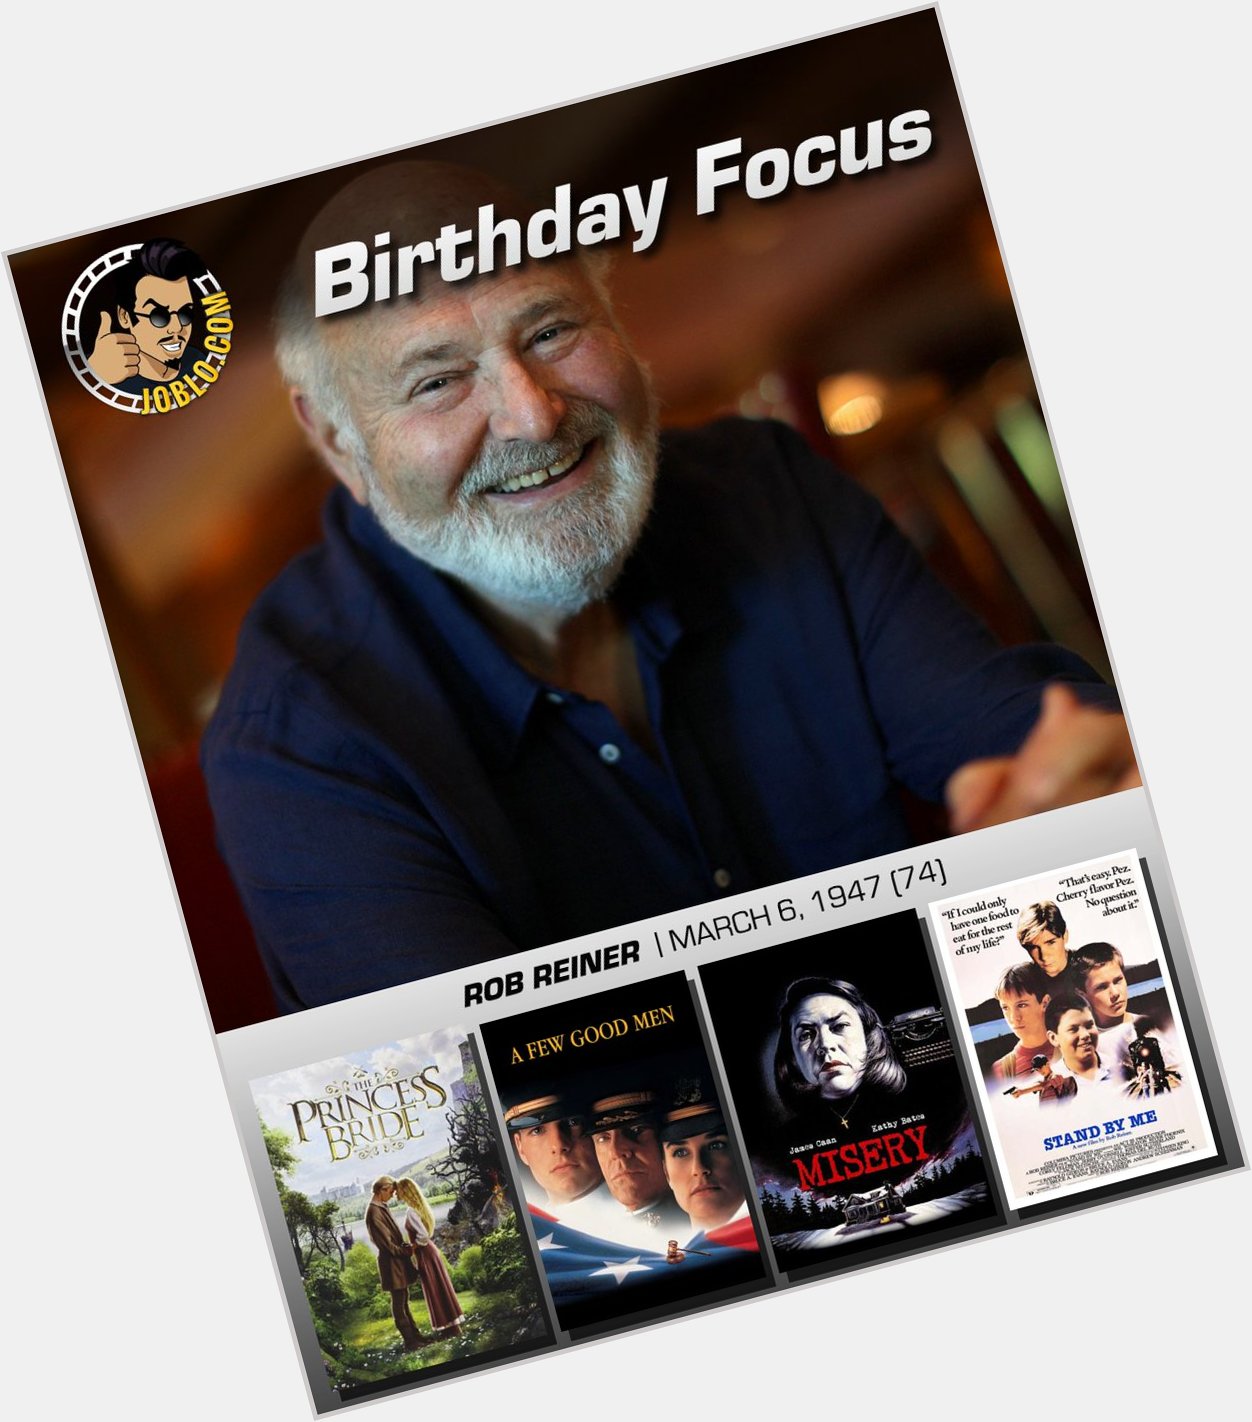 Wishing a very happy 74th birthday to Rob Reiner! 